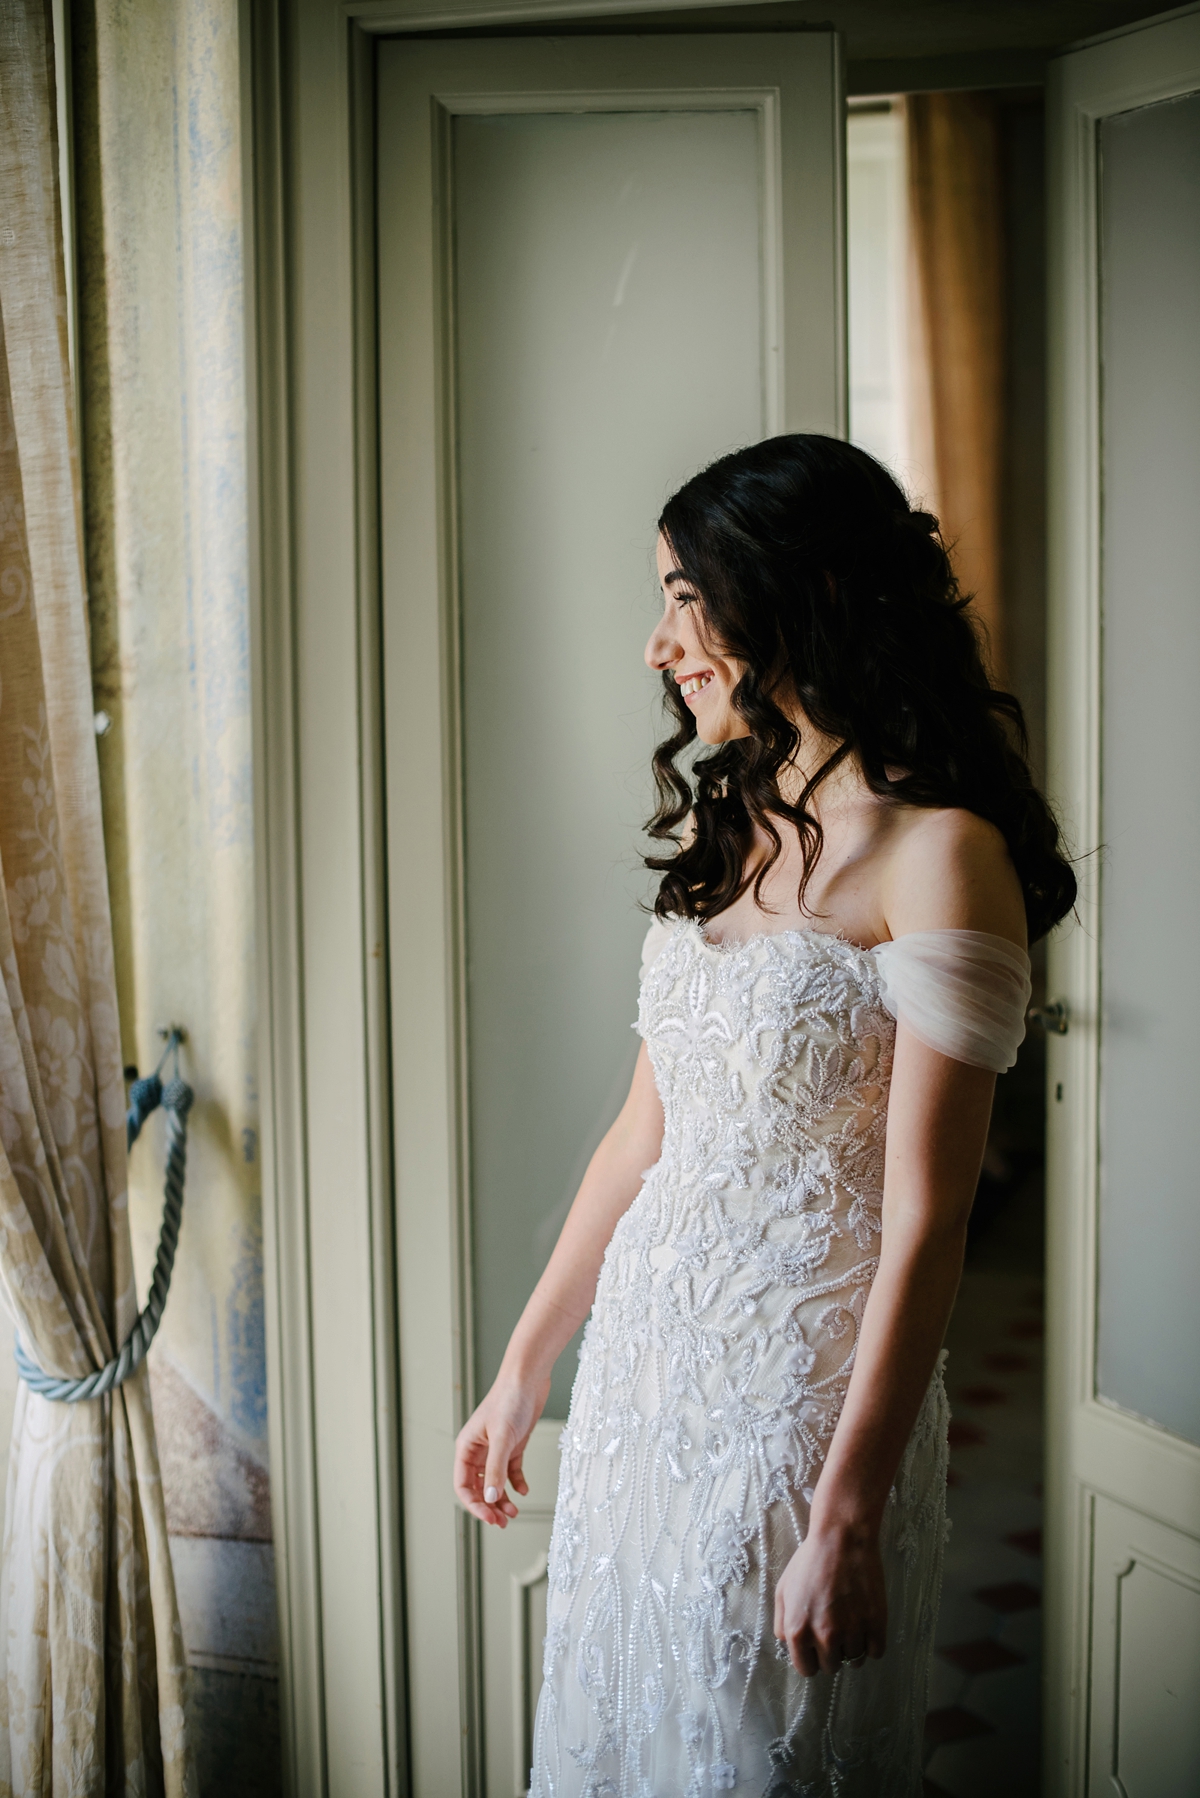 15 A Monique Lhuillier gown for a romantic summer villa wedding on Lake Como in Italy